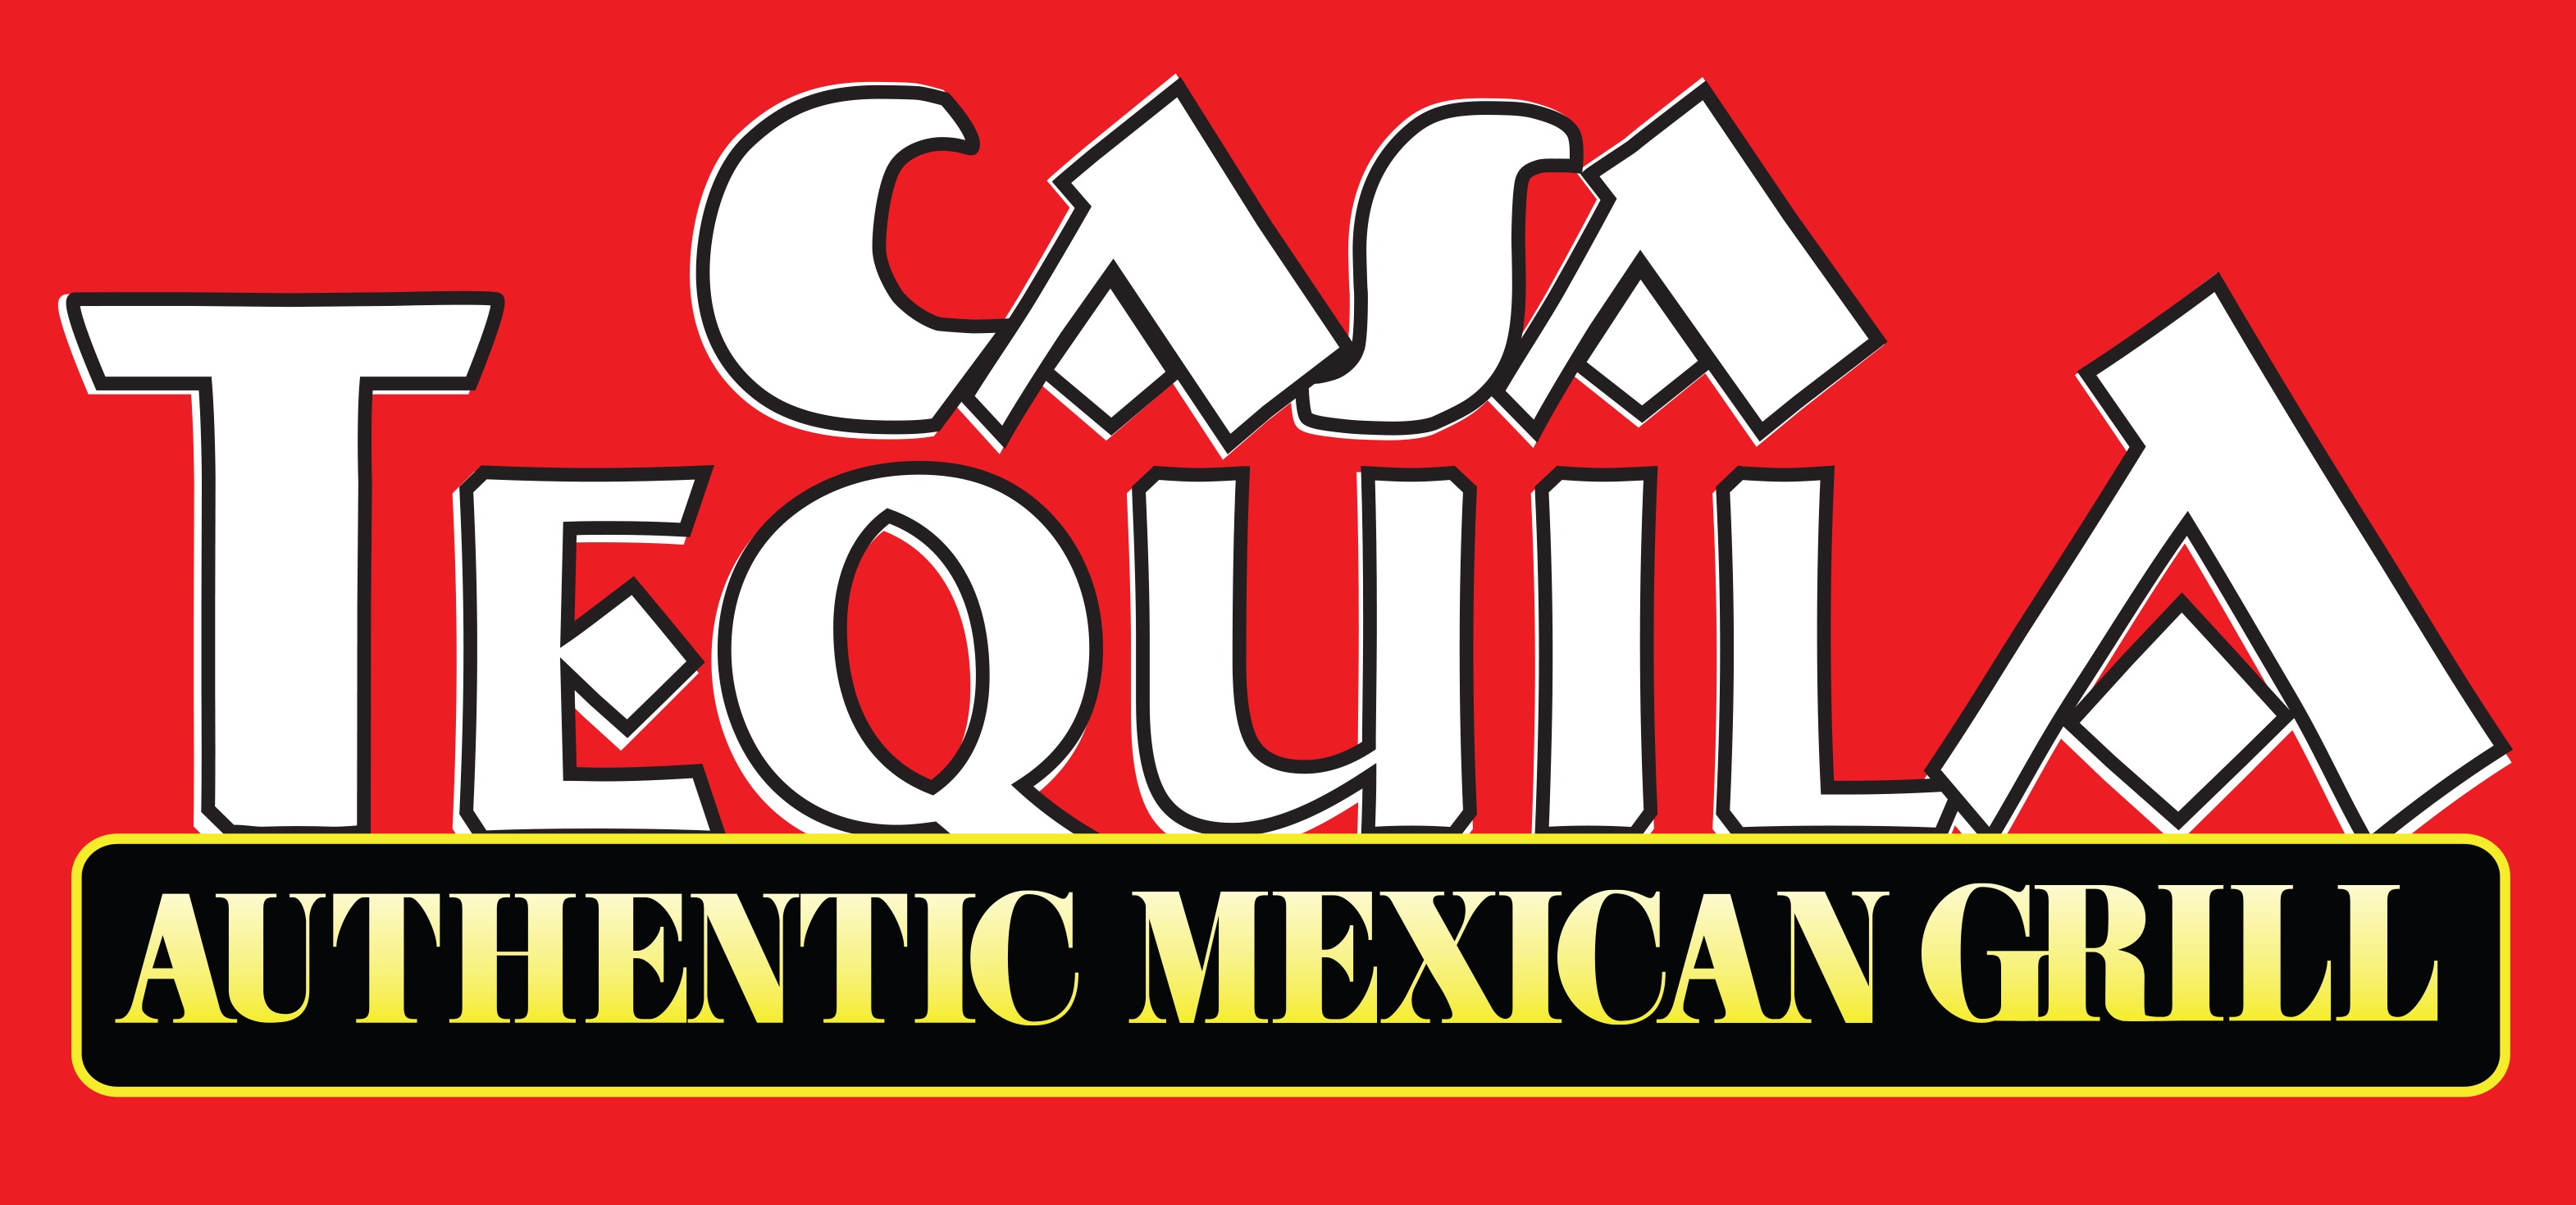 Casa Tequila Authentic Mexican Grill